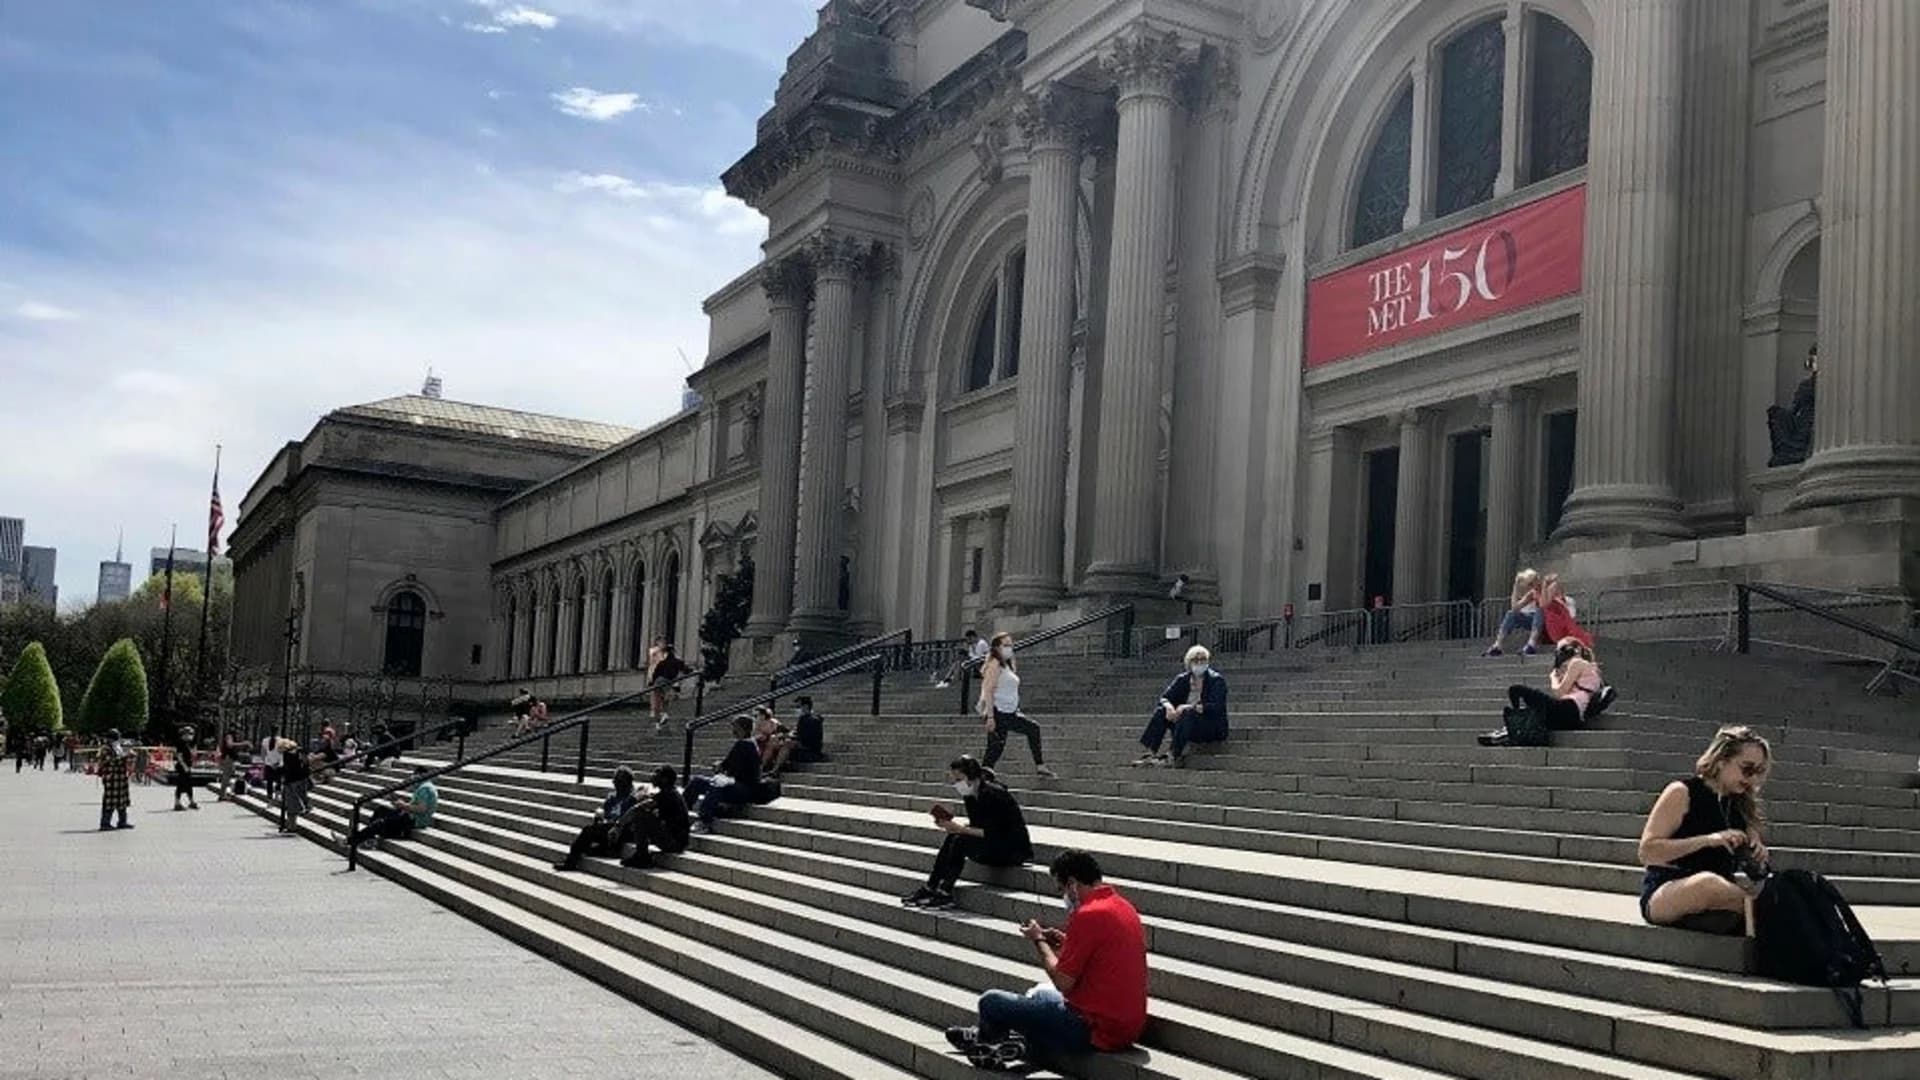 New York’s Met Museum to open 5 days a week starting Aug. 29